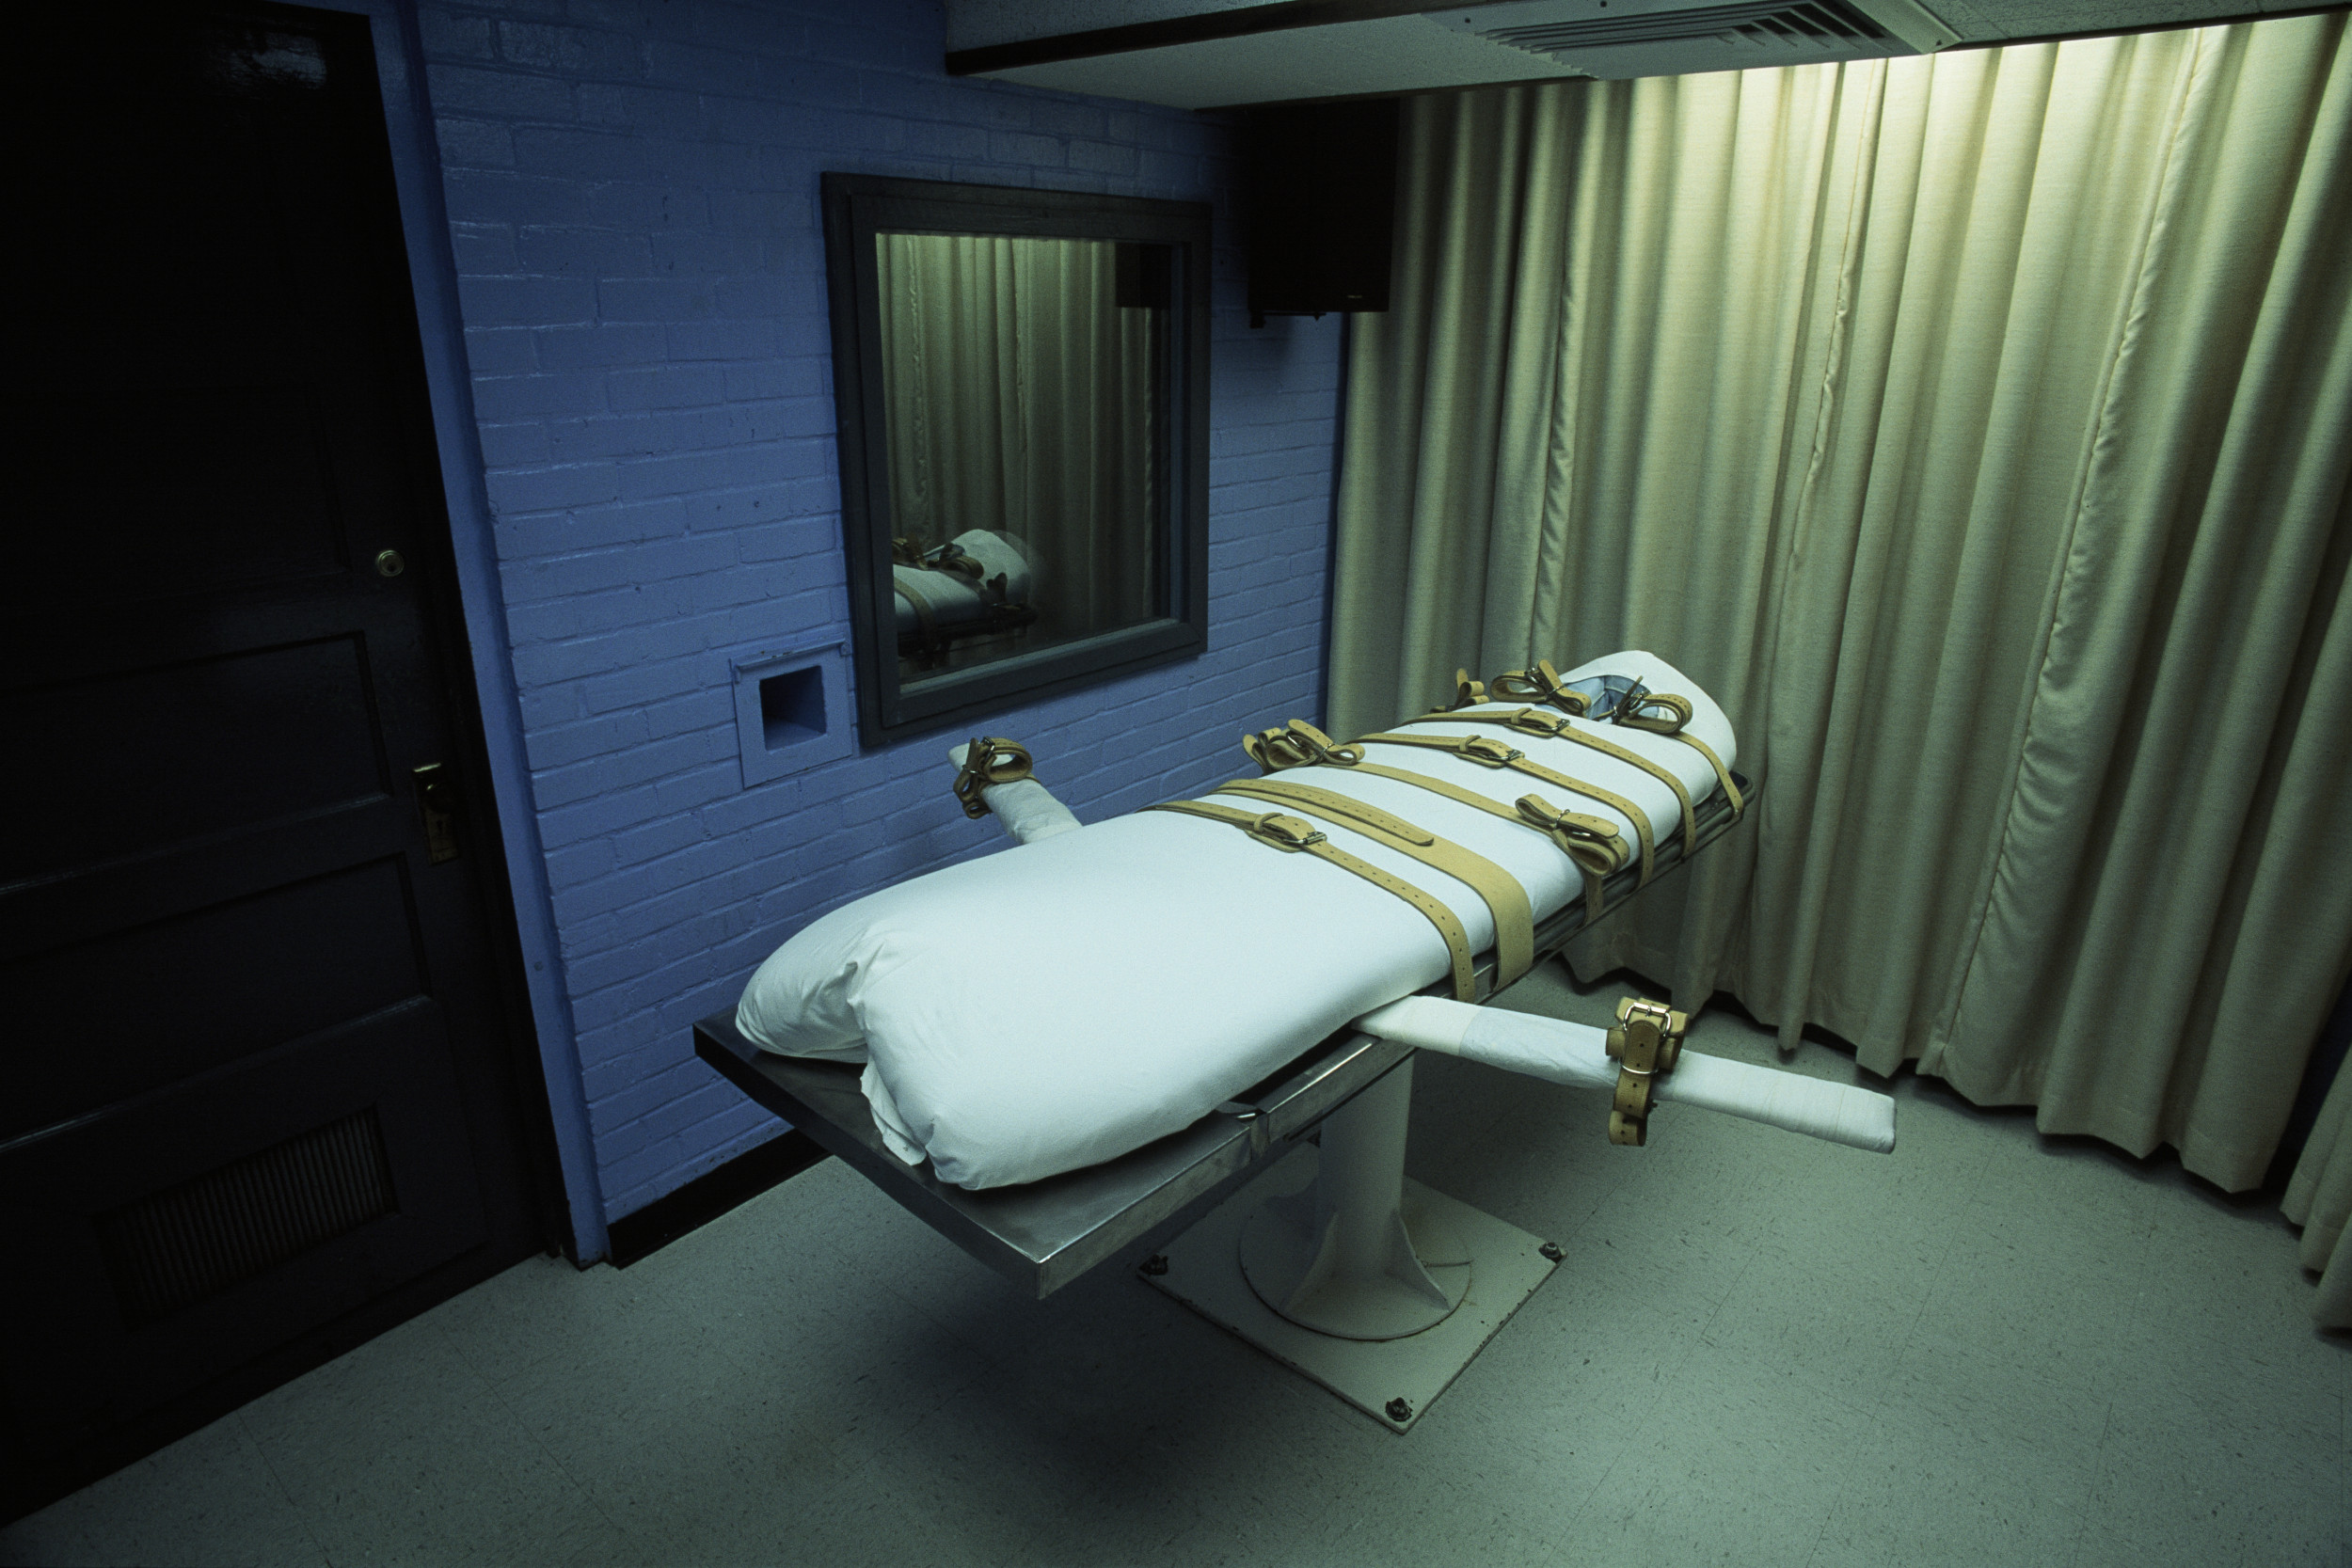 lethal injection drugs